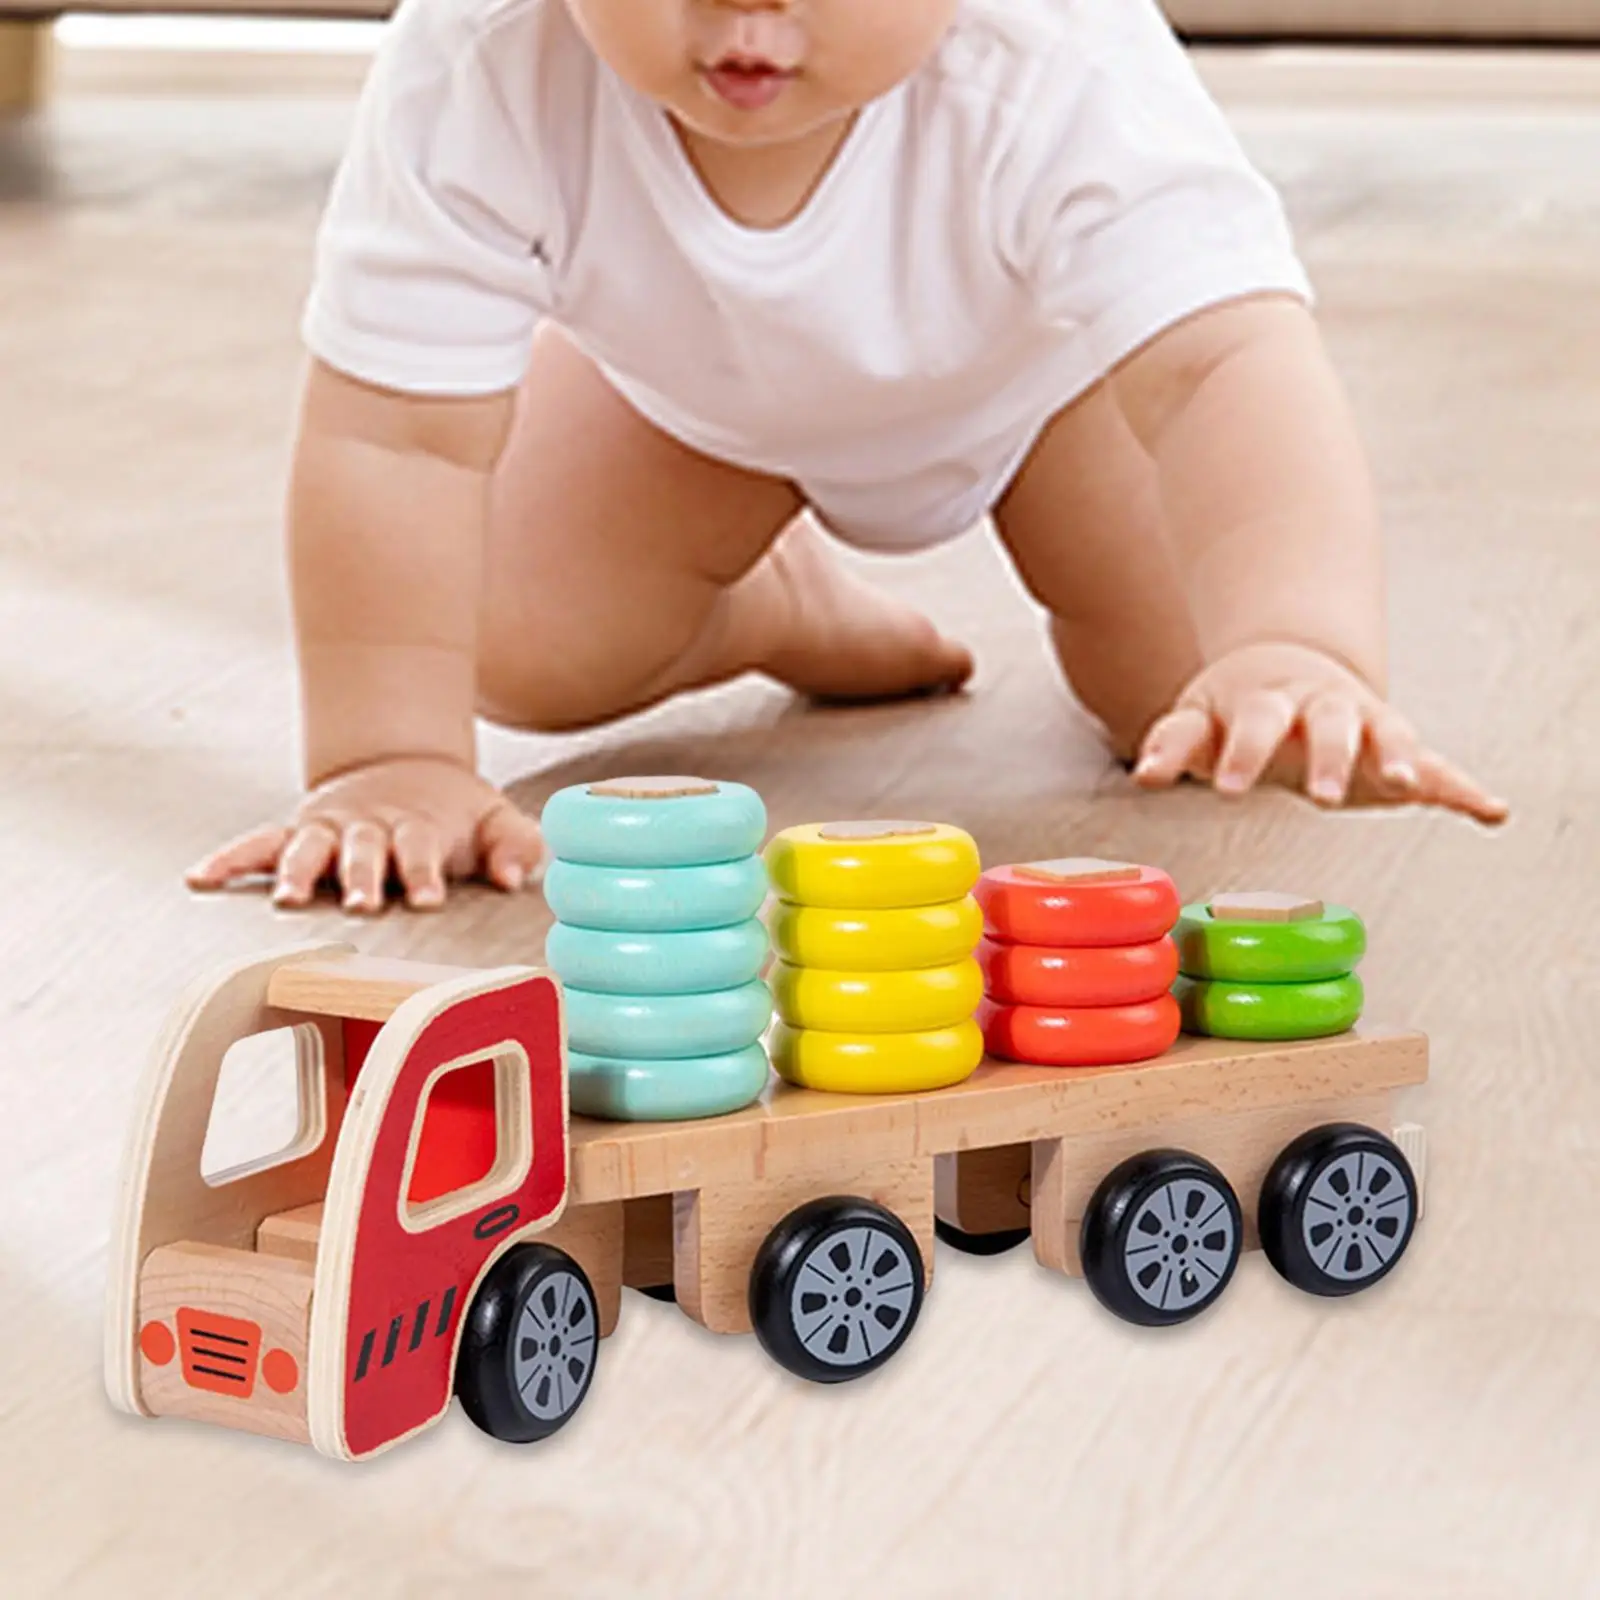 Wooden Train Set Wooden Stacking Train Building Toys Shape Sorters for Baby